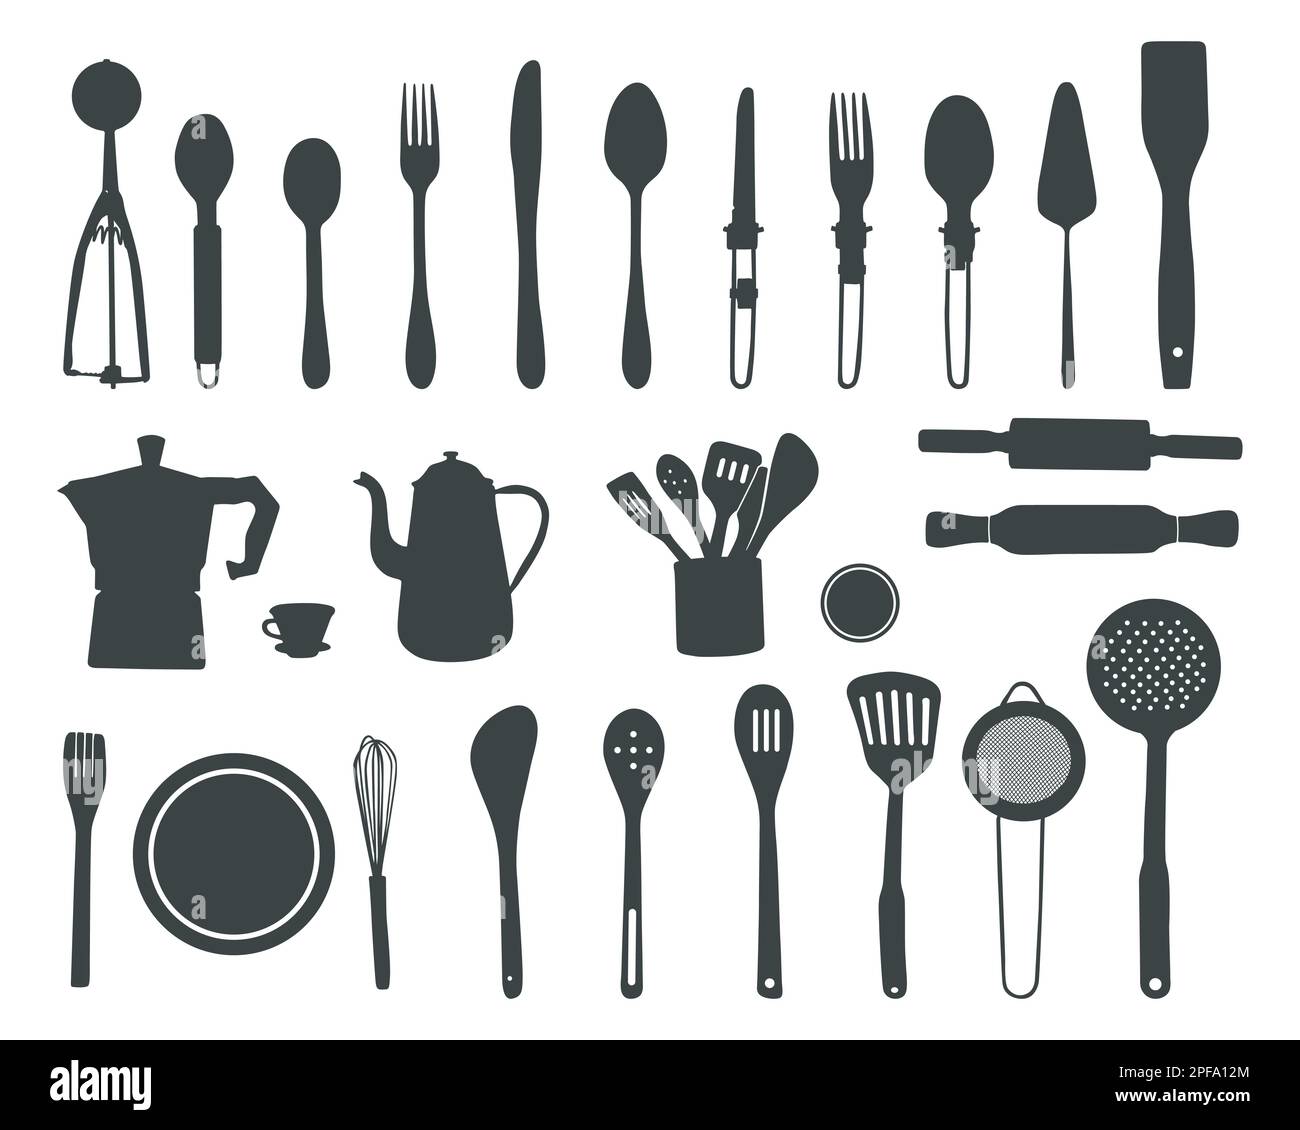 Kitchen utensils silhouette Black and White Stock Photos & Images